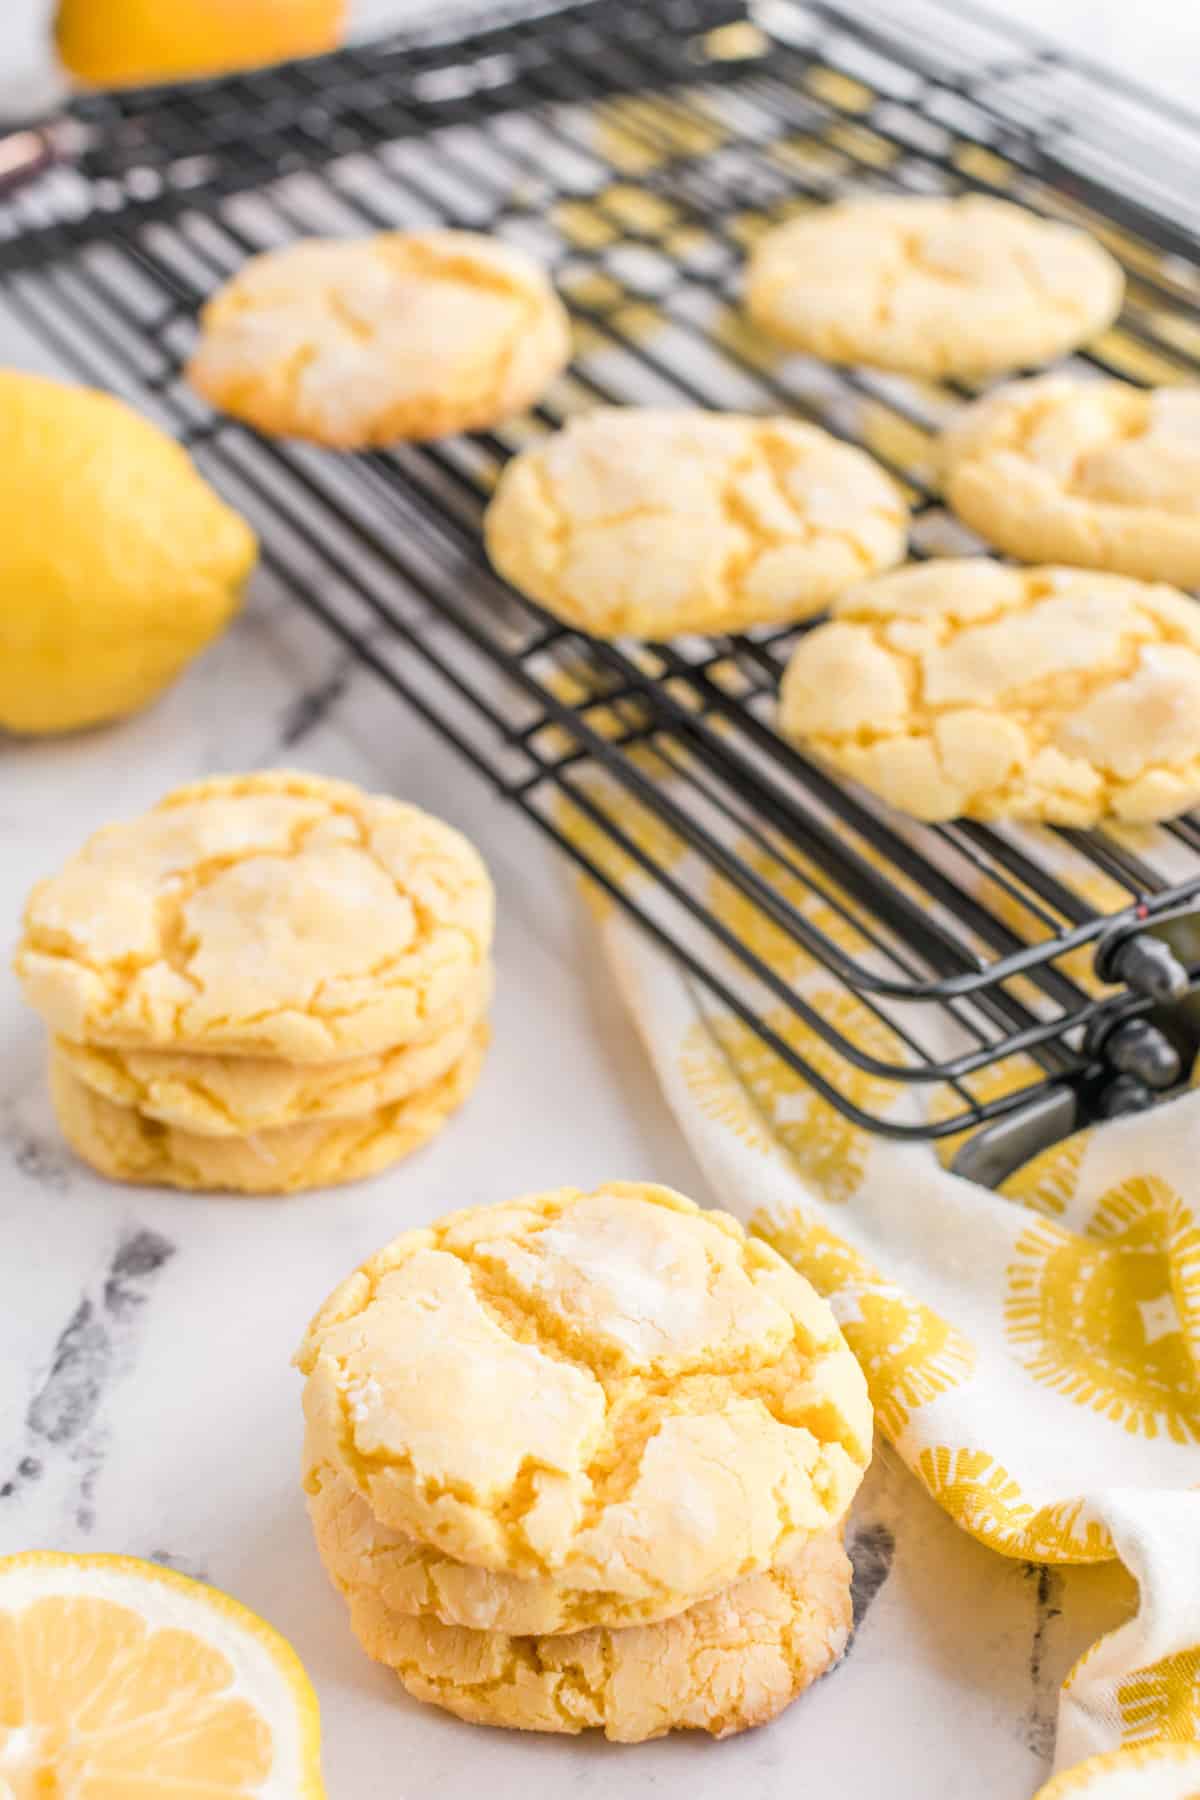 Lemon cookies made from cake mix next to a wire cooling rack with more cookies.